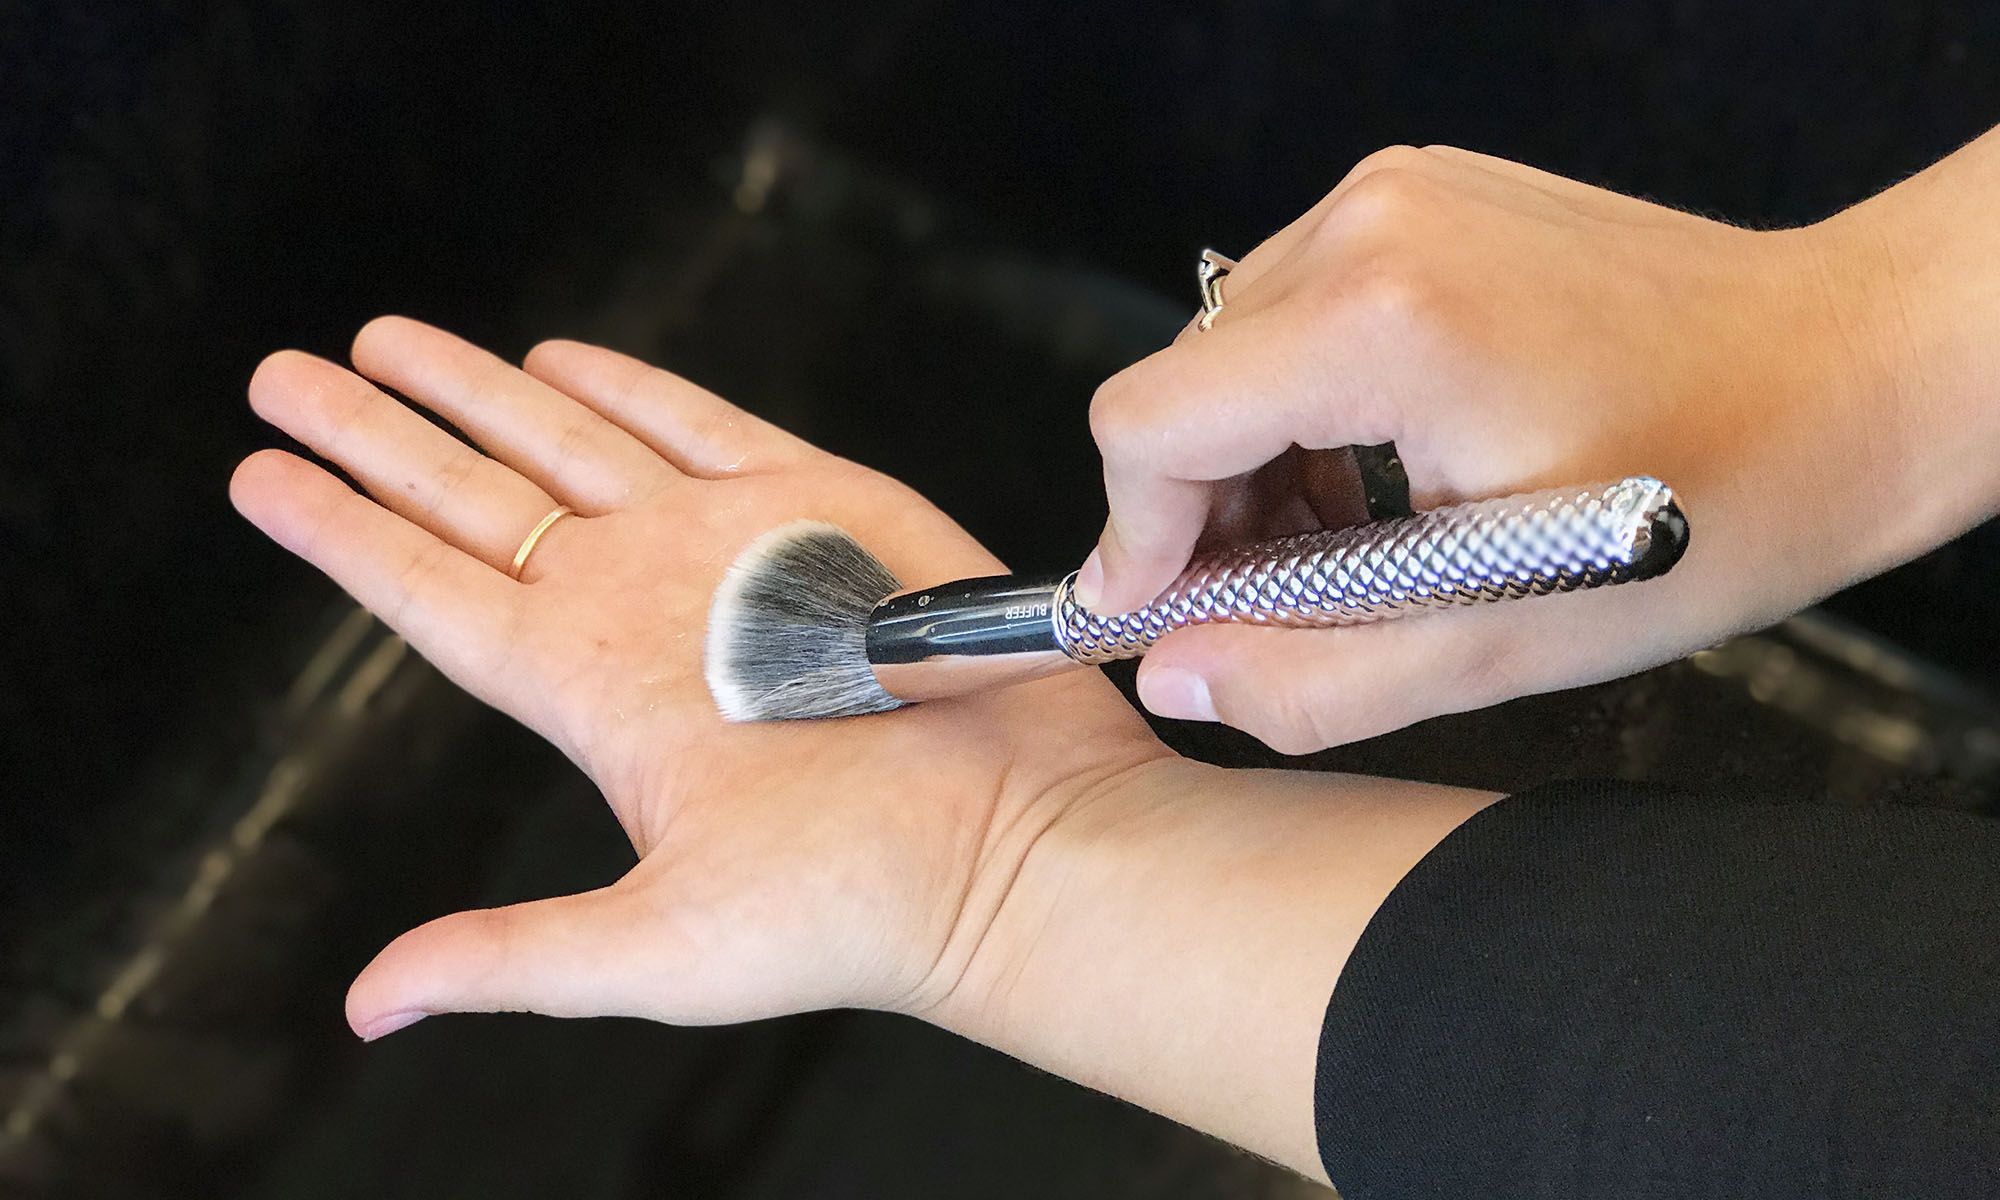 How Often Should You Clean Your Makeup Brushes? We'll Explain - CNET